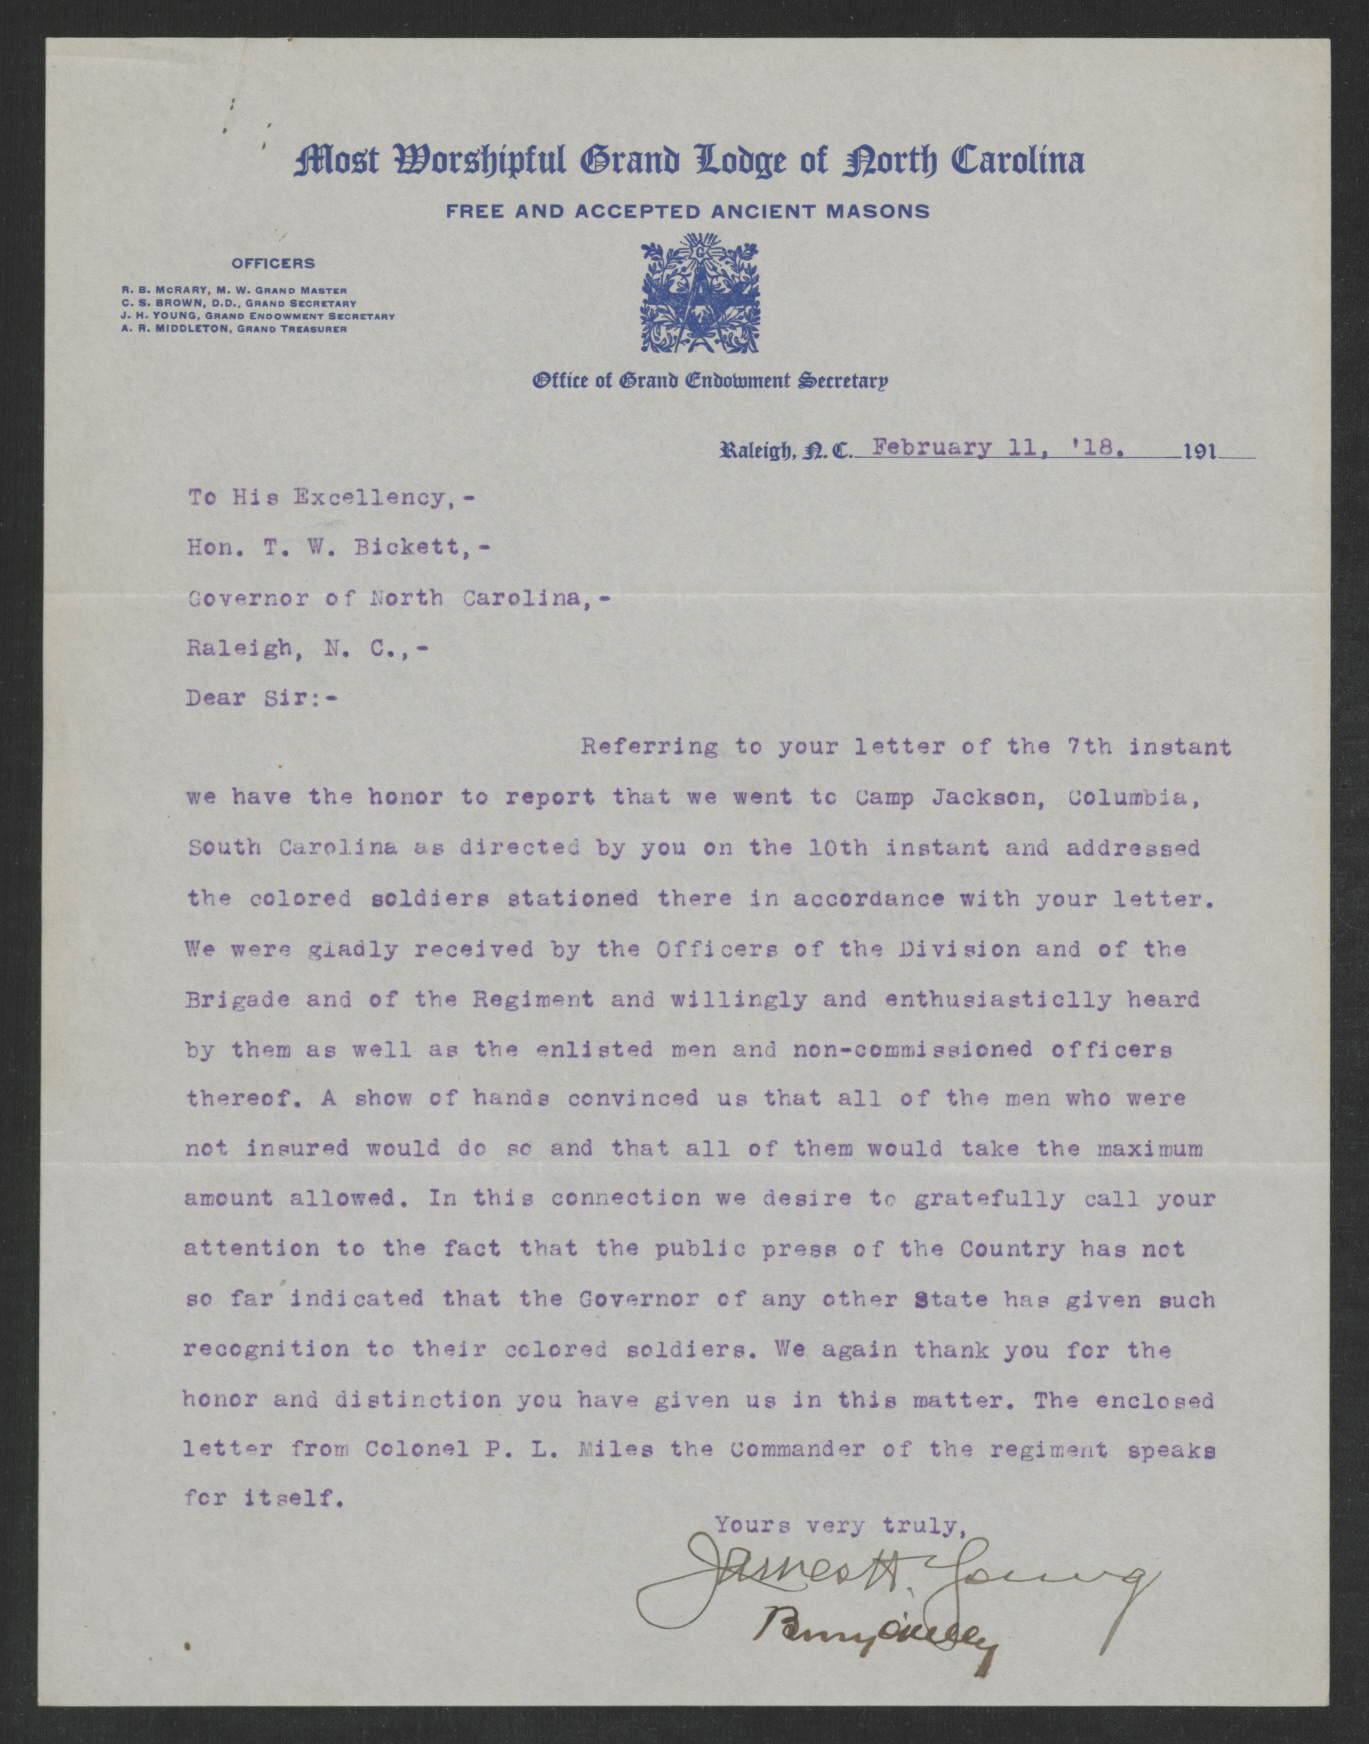 Letter from James H. Young and Berry O'Kelly to Gov. Bickett, February 11, 1918